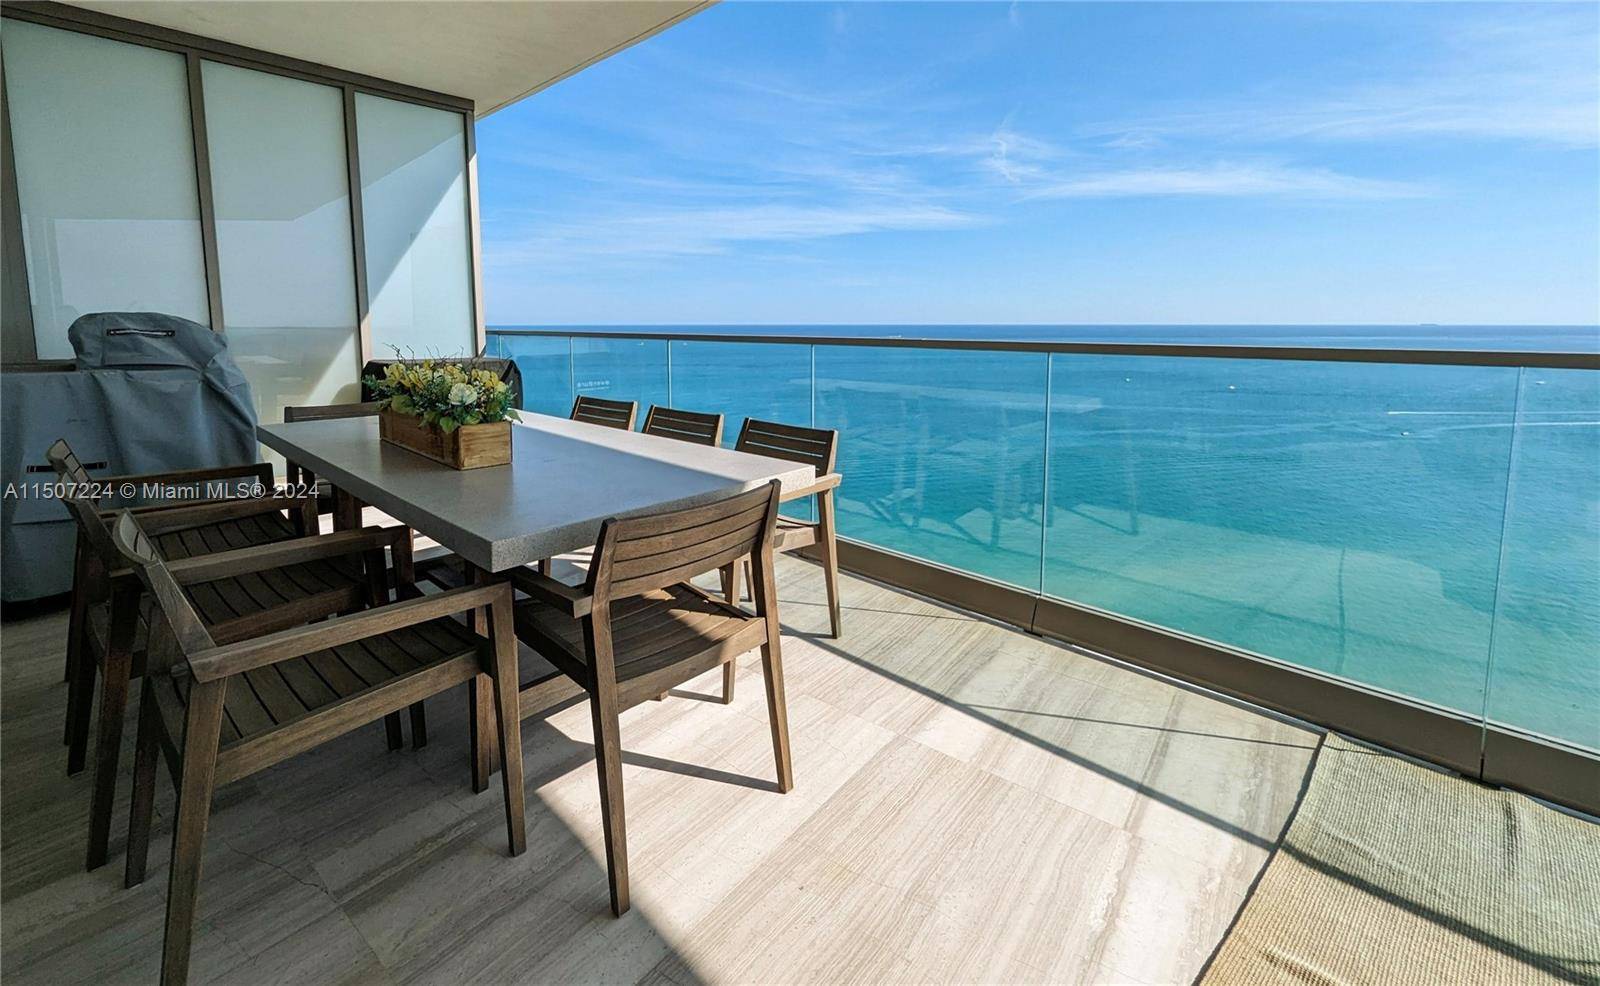 Live the Armani dream at this oceanfront masterpiece in Sunny Isles Beach Florida.